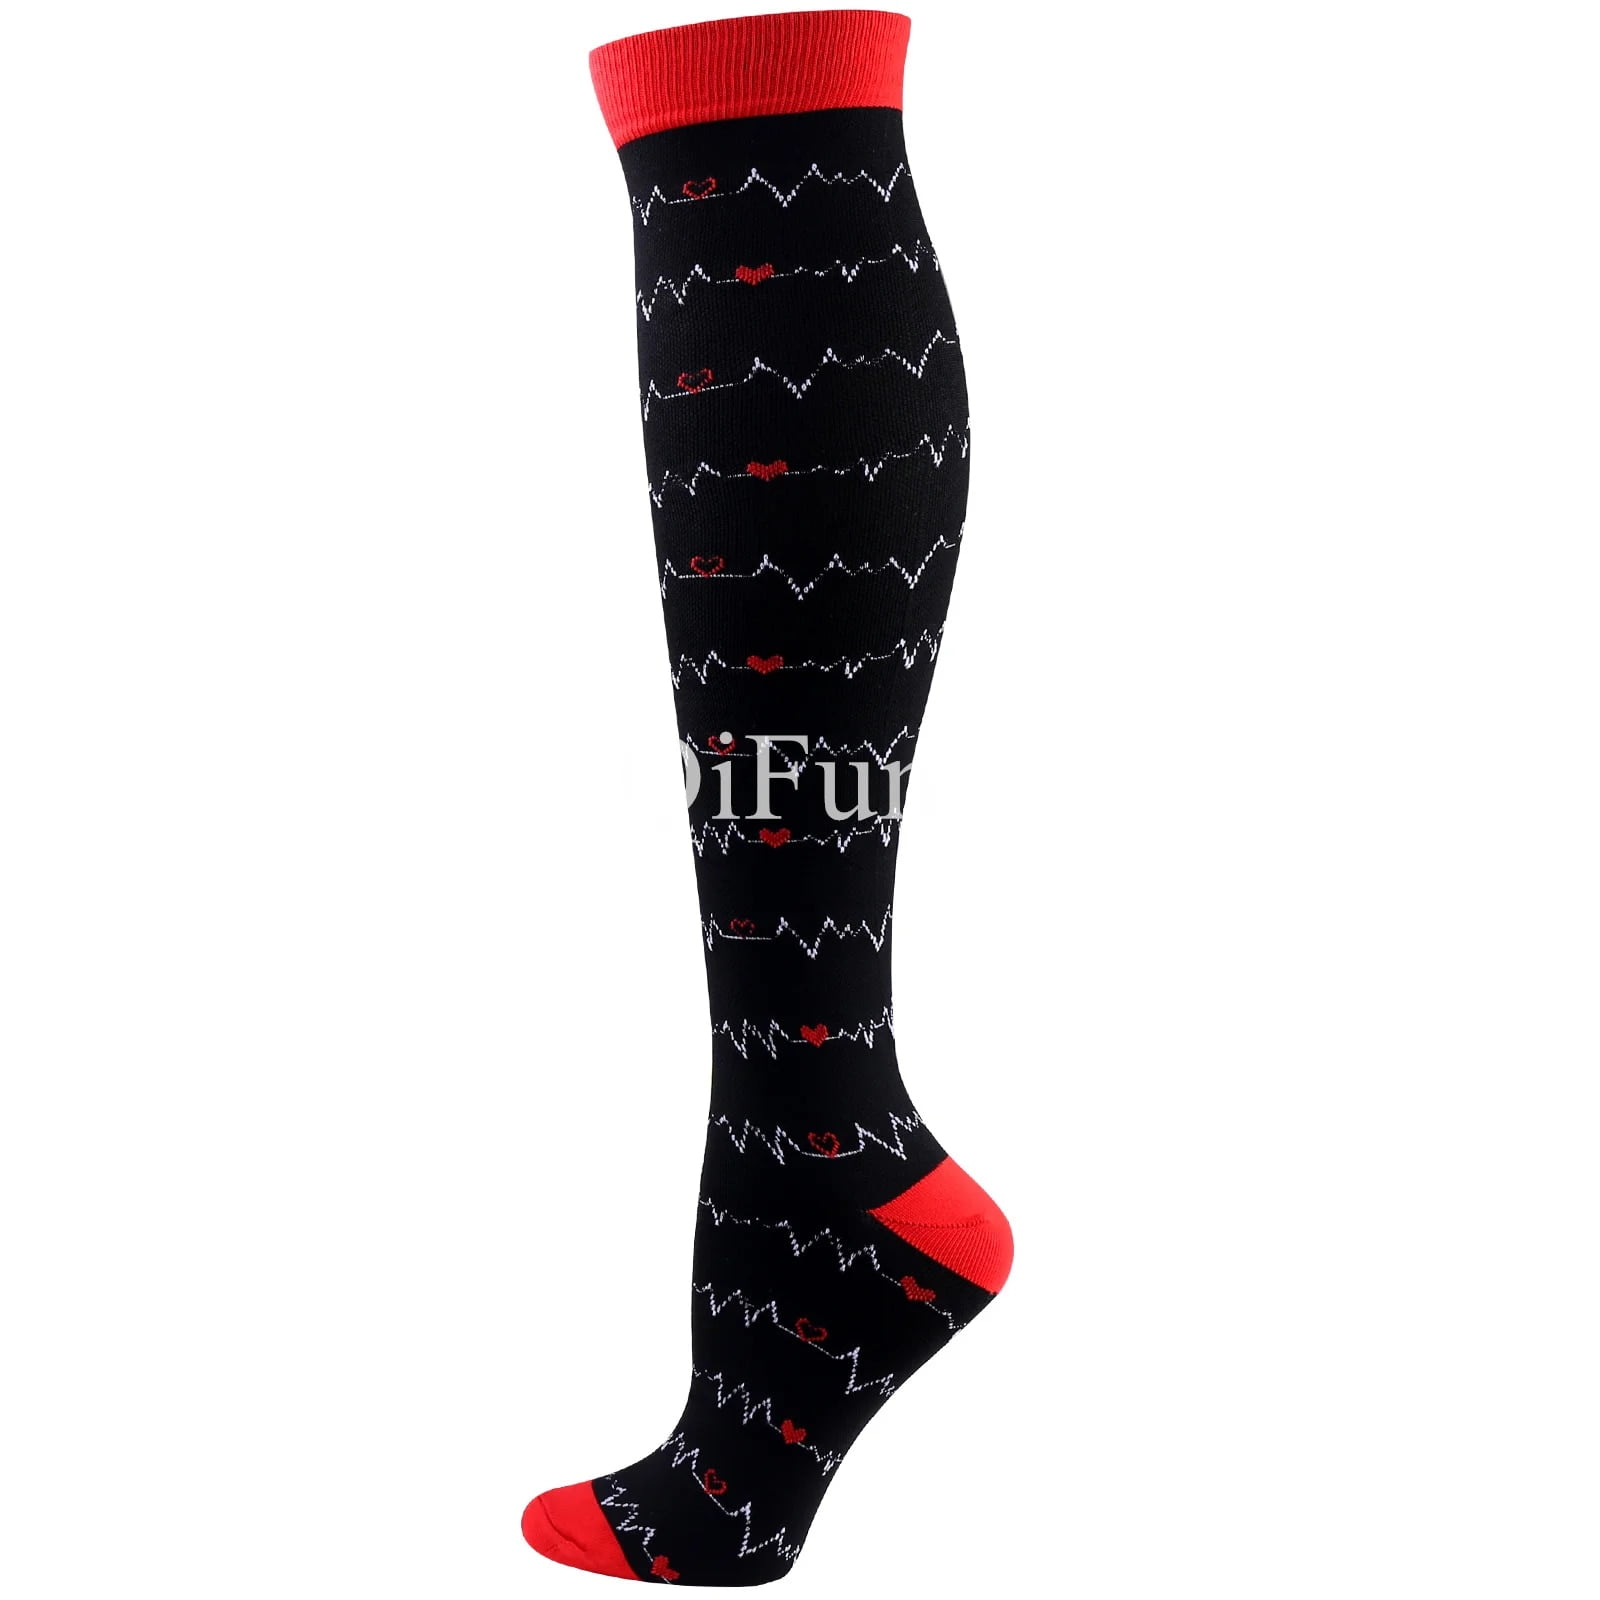 58 Styles Quality Unisex Compression Stockings Cycling Socks Fit ...